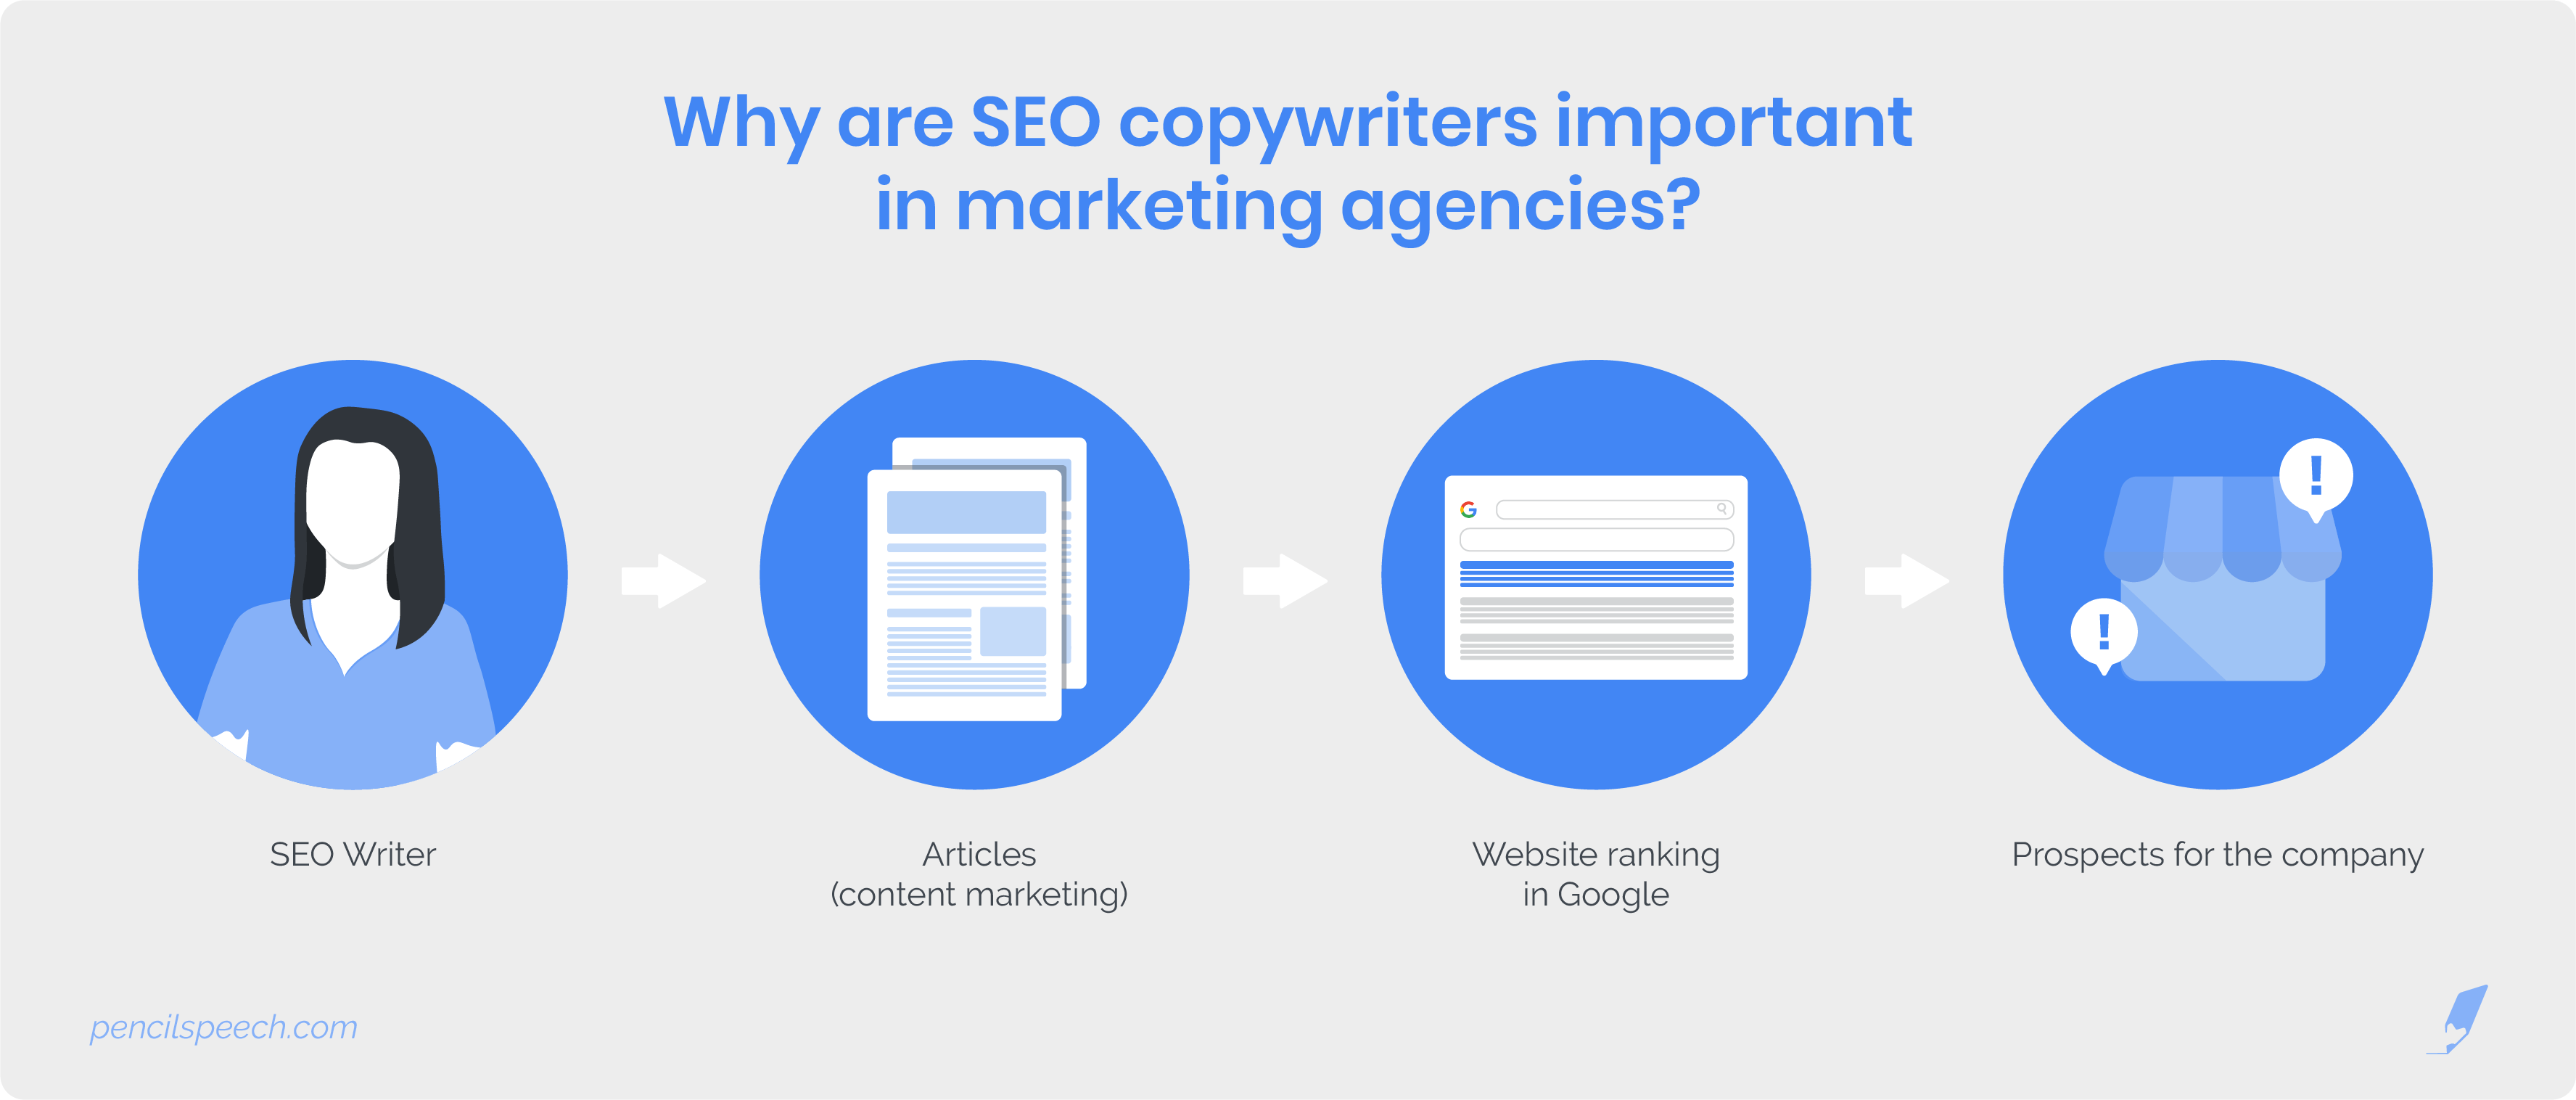 Why are SEO copywriters important in marketing agencies?